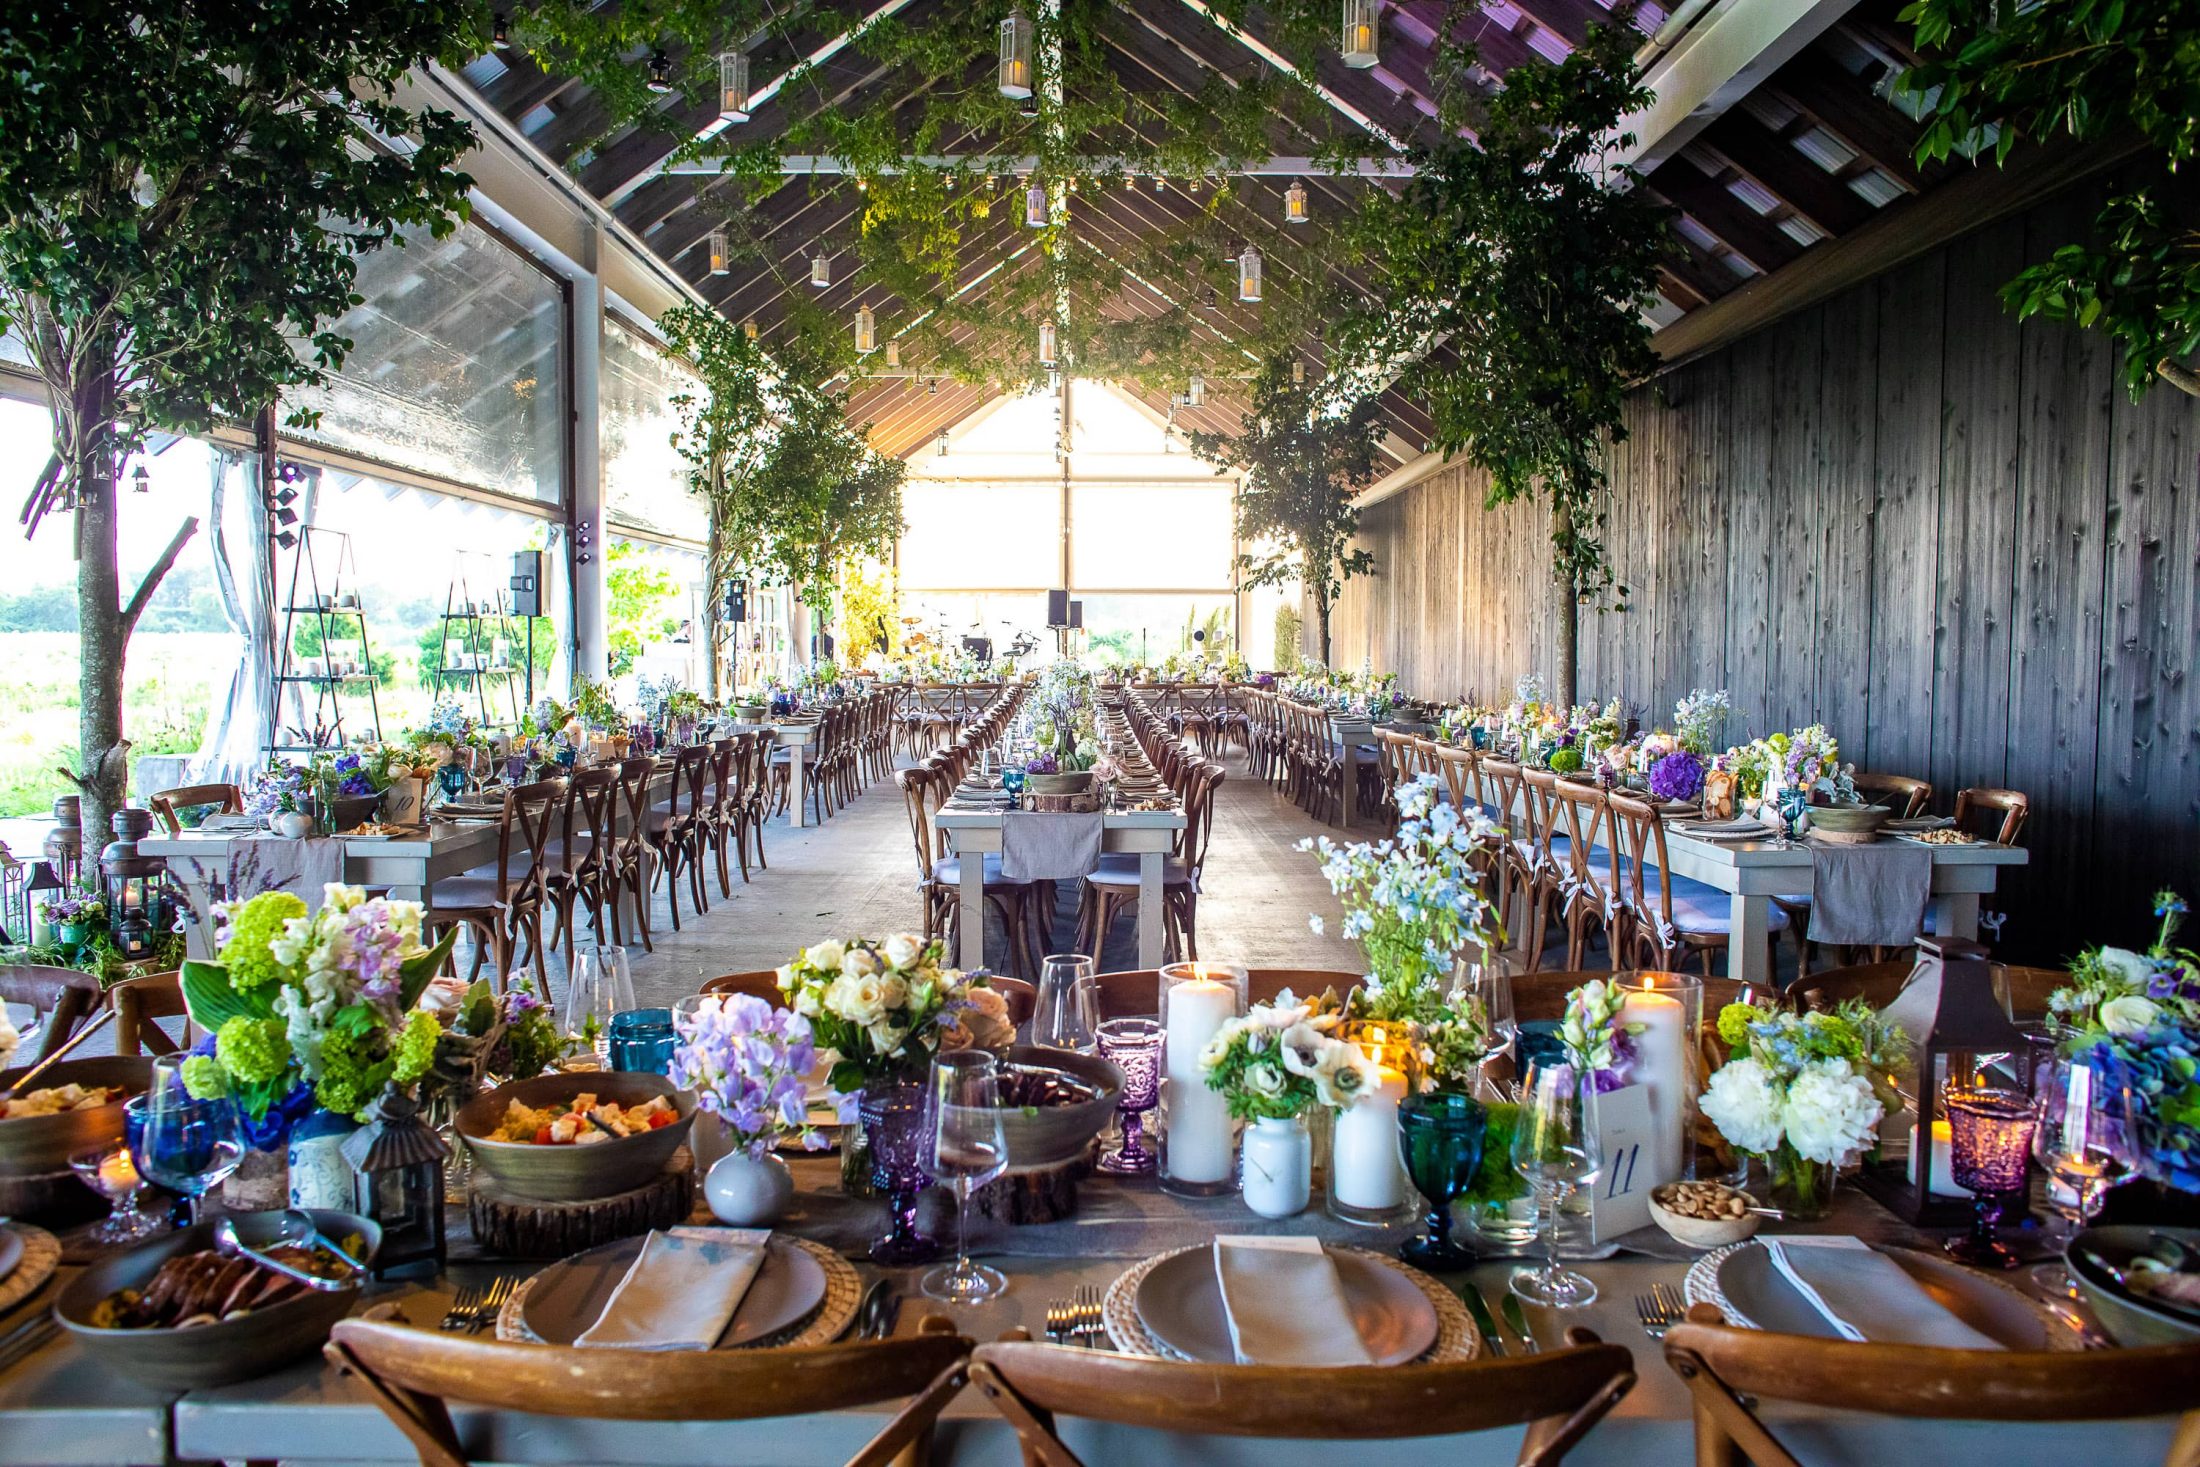 Reception at this Hamptons wedding weekend held at The Parrish Museum | Photo by Roey Yohai Studio